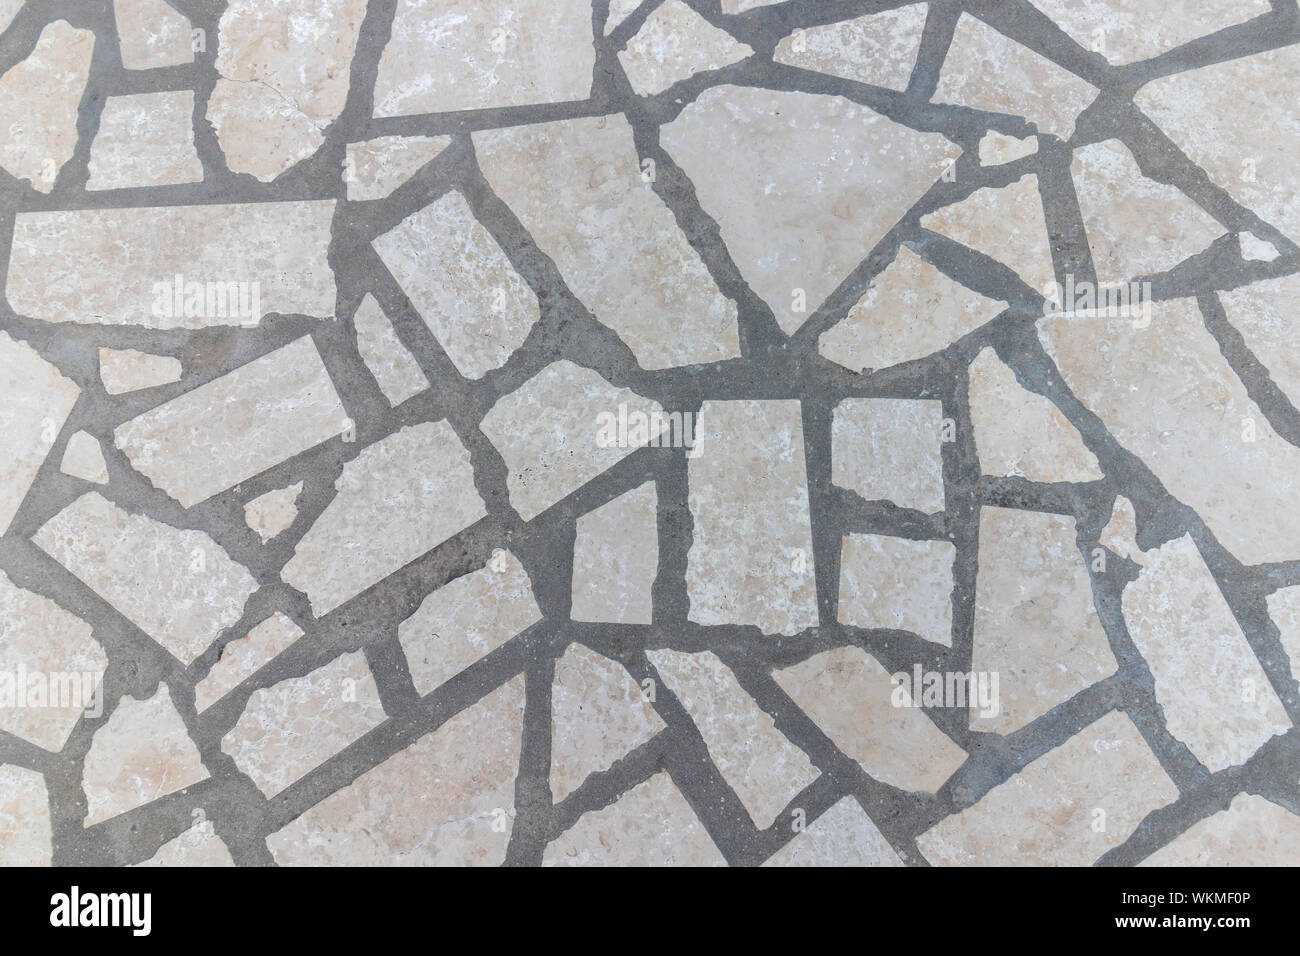 mosaic of stones slab with joints Stock Photo